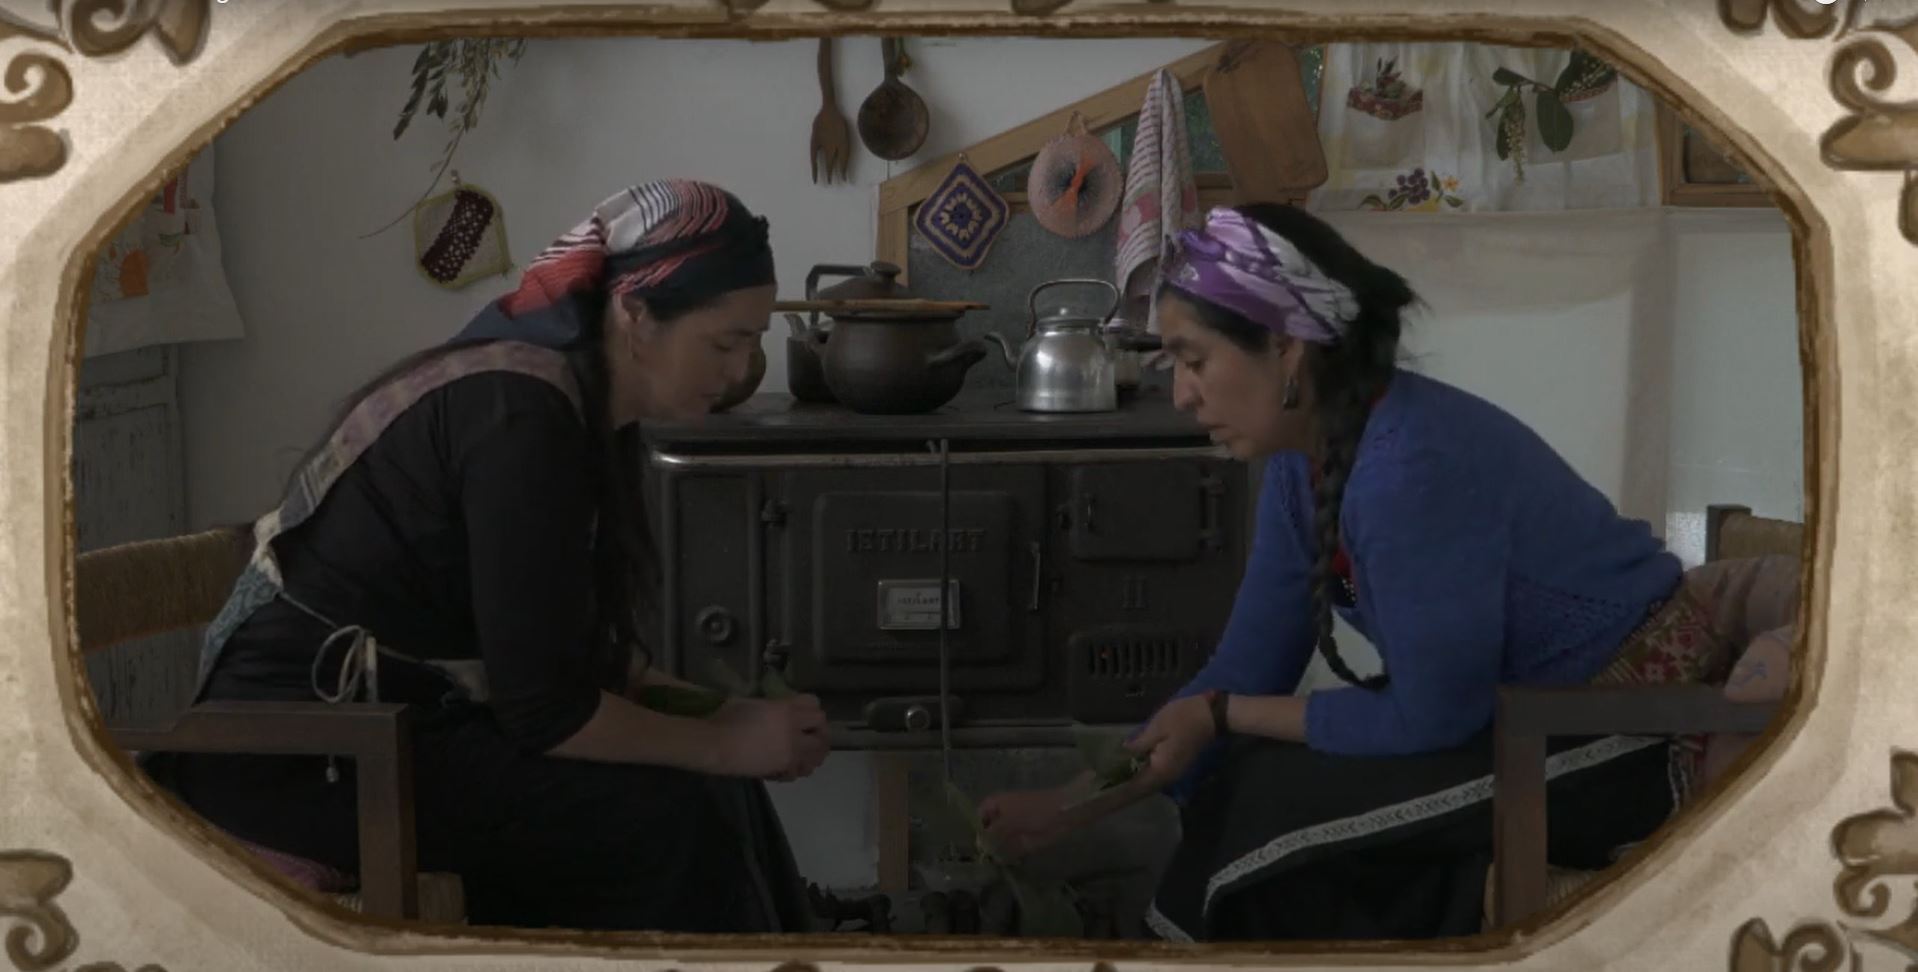 Two Mapuche women in the kitchen of a rural home, preparing an herbal remedy.